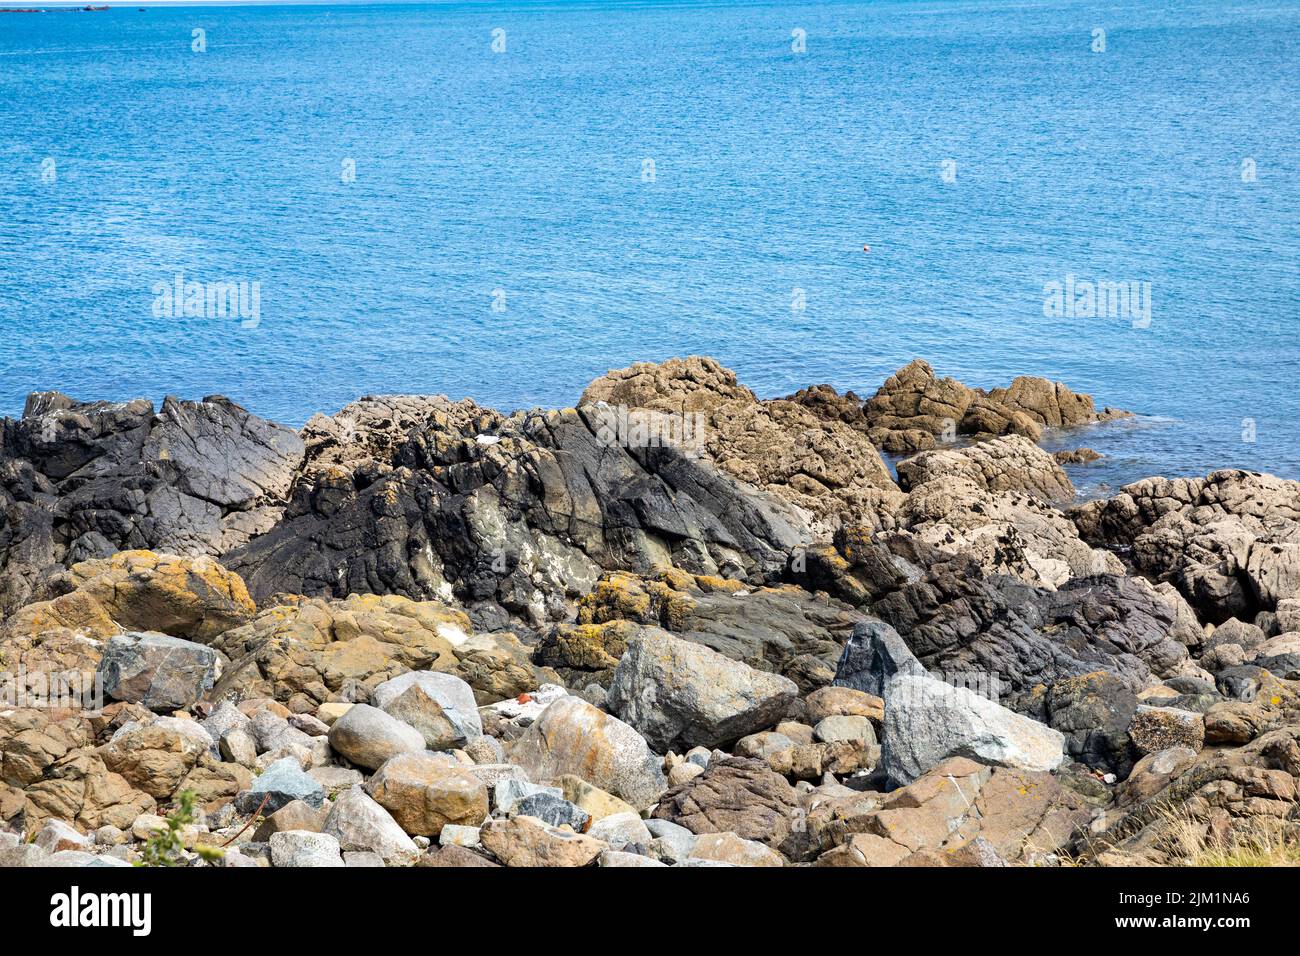 A view across the rocks in Coverack Bay, Cornwall,UK Stock Photo